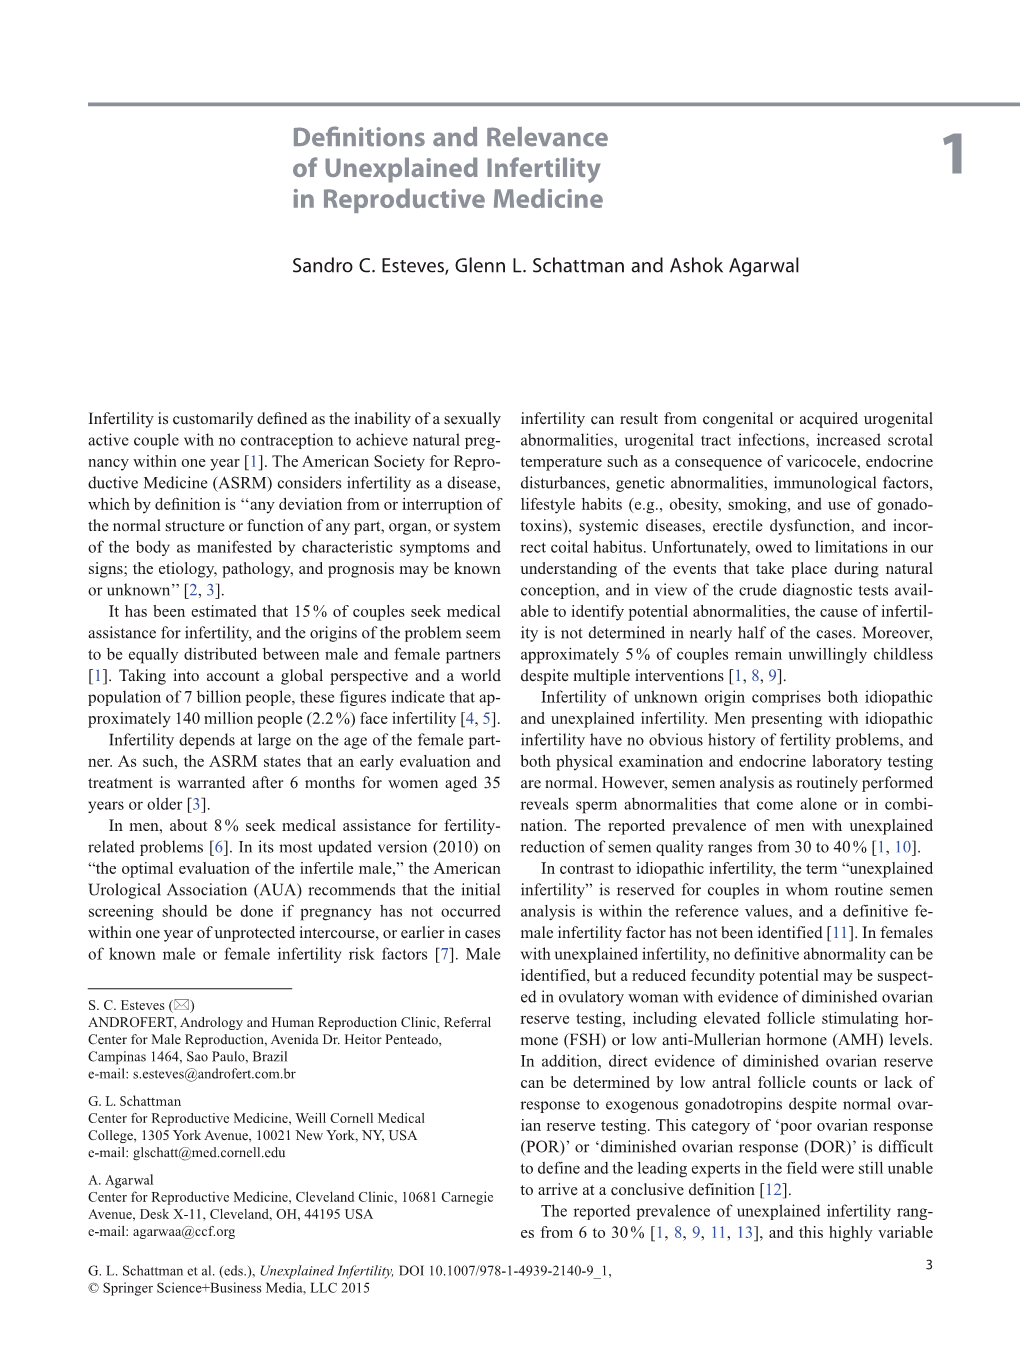 Definitions and Relevance of Unexplained Infertility in Reproductive Medicine 5